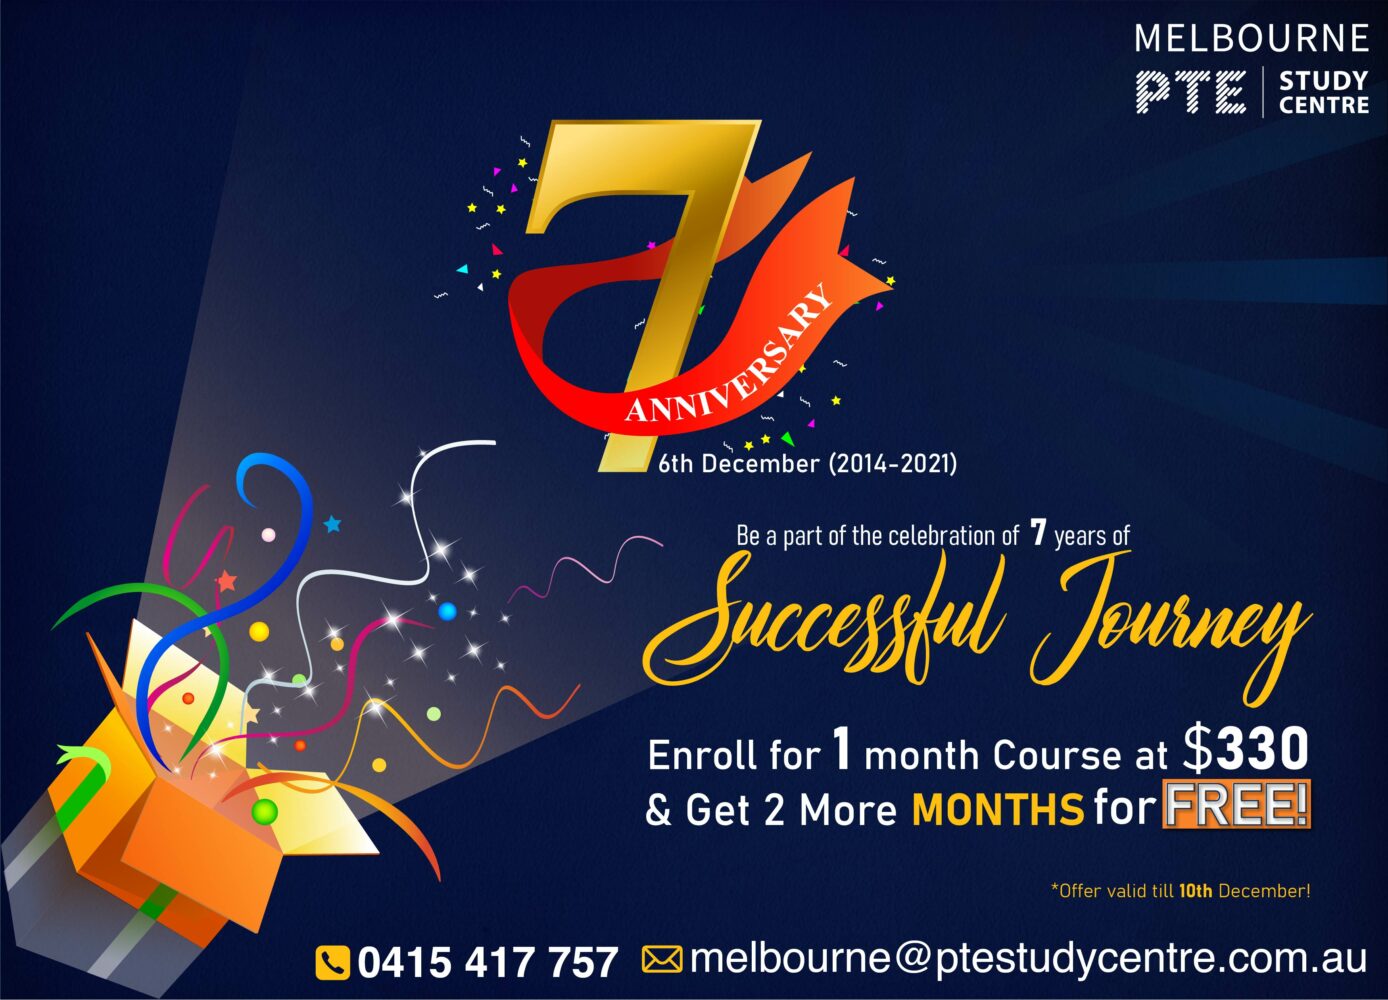 Buy 1 Month Course at $330 and Get 2 Months Extra | 7th Anniversary Offer